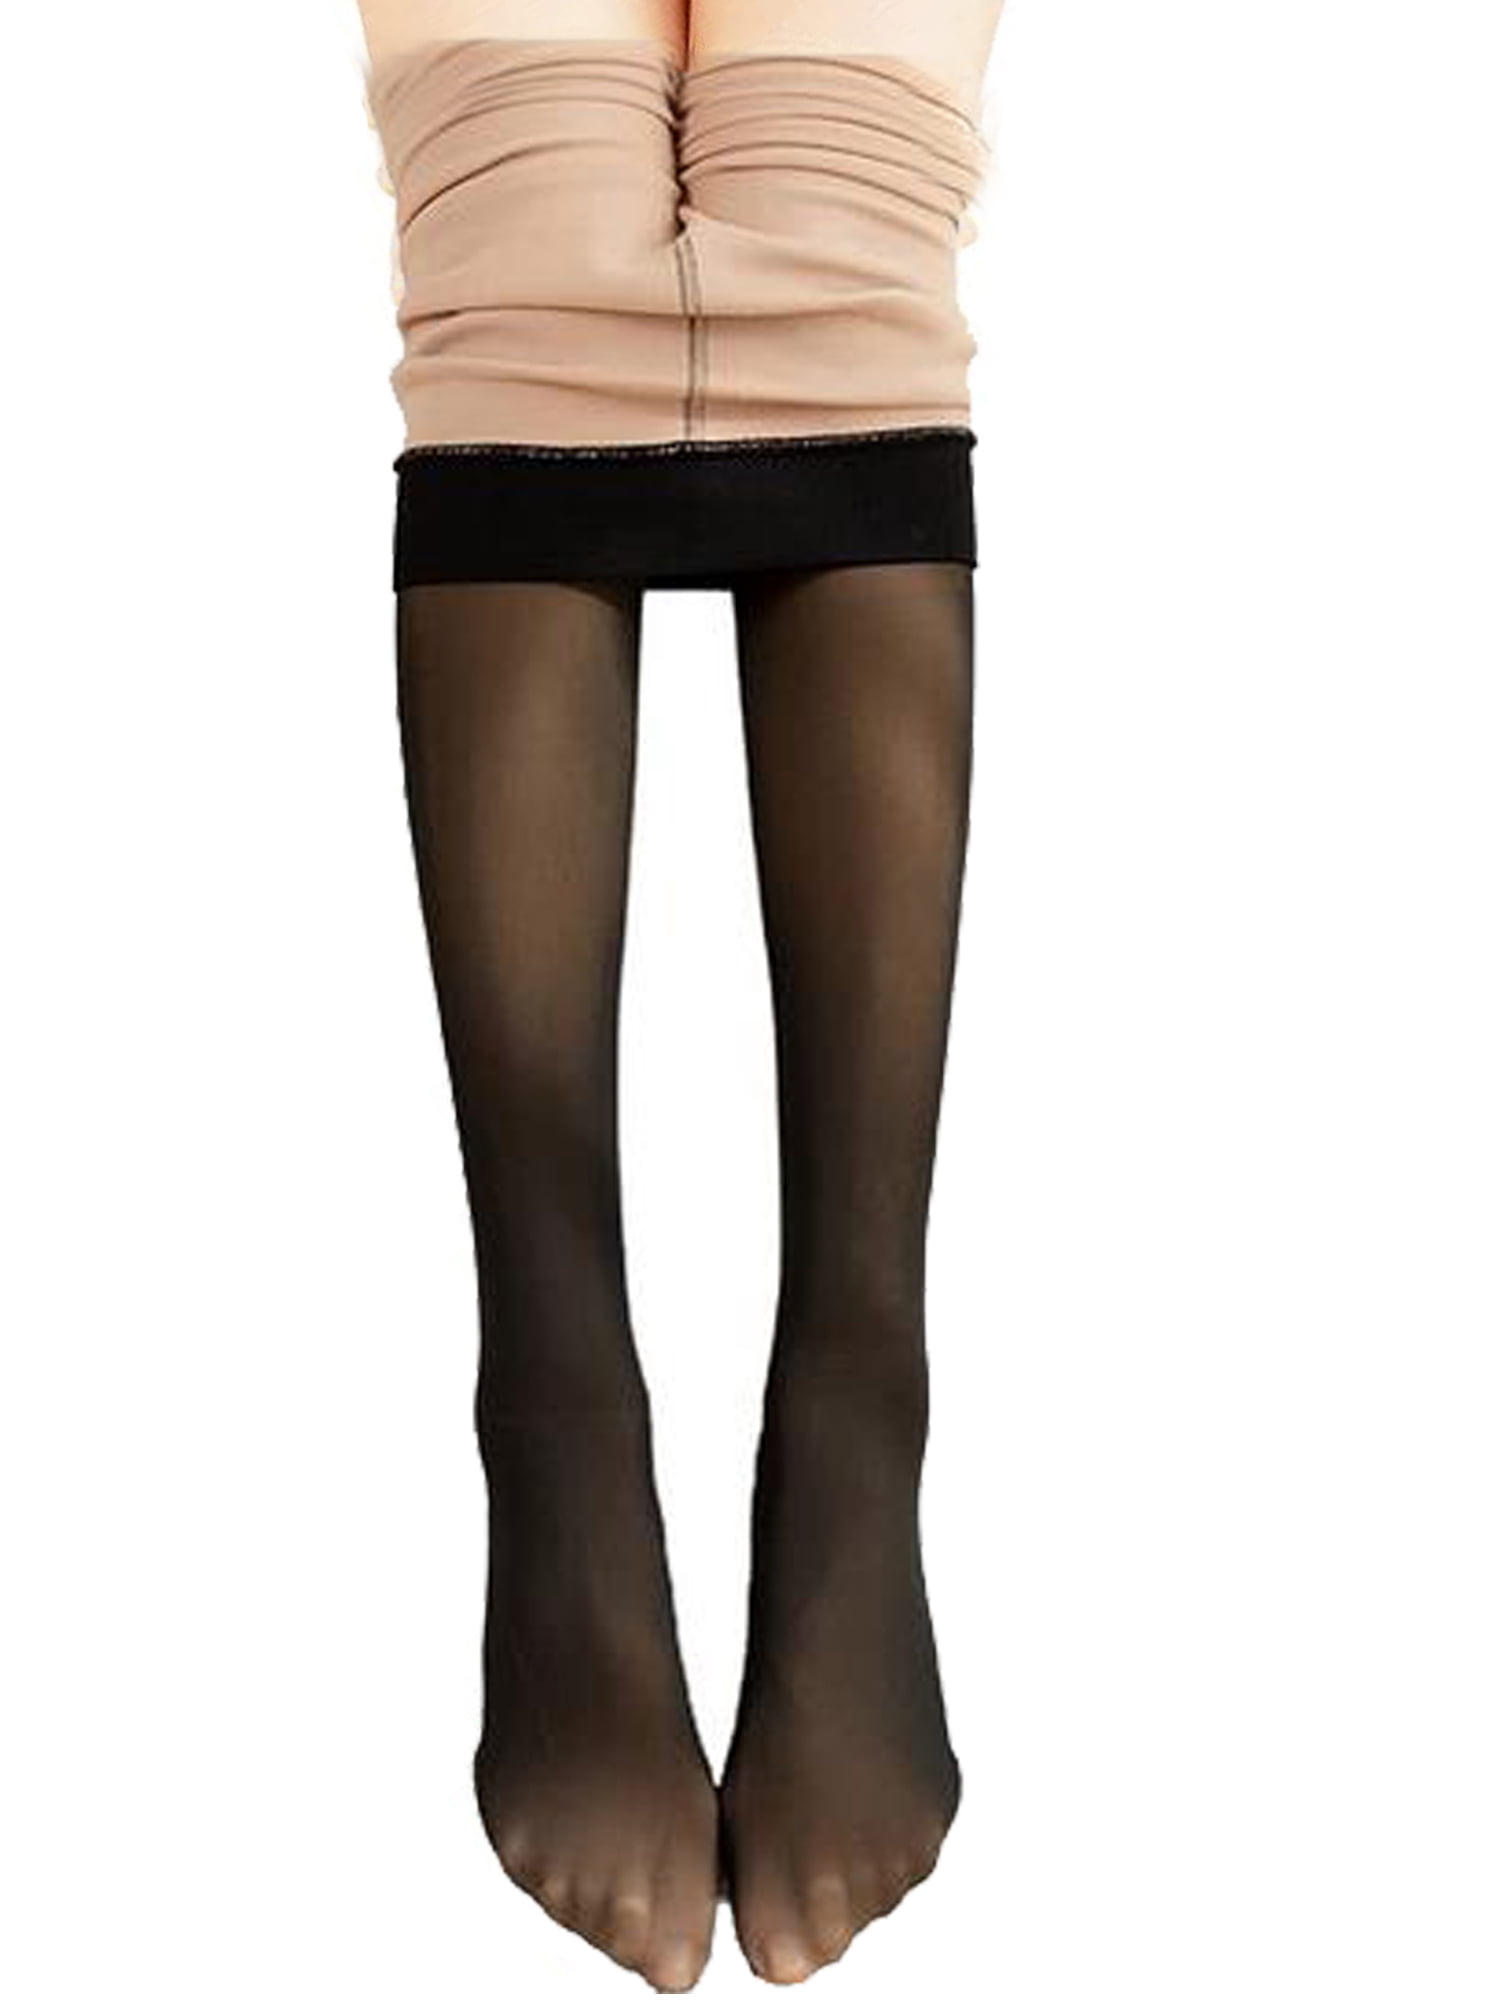 JBEELATE Women's Fleece Lined Tights Thick Pantyhose Translucent Leggings  for Winter Cold Weather 